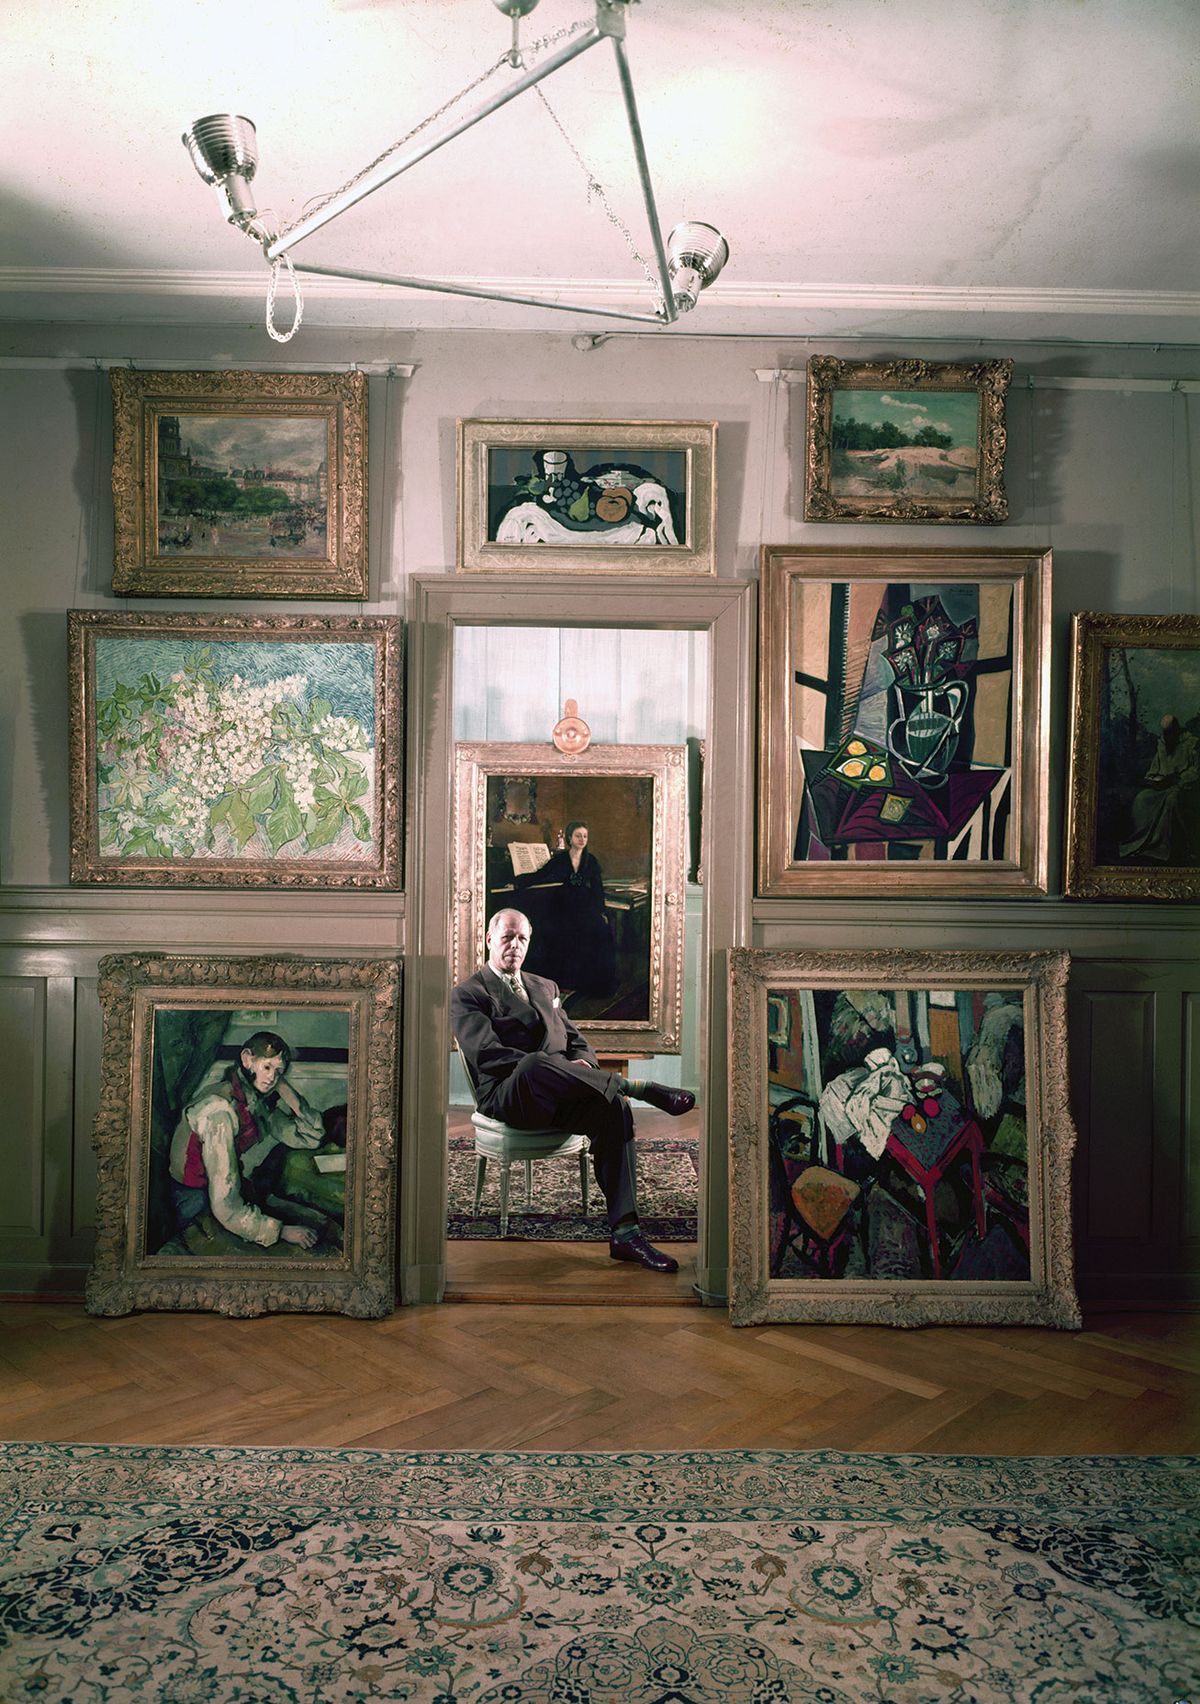 The German-born Swiss industrialist and art collector Emil Georg Bührle posing with his paintings in Zurich in 1954 Dmitri Kessel/The LIFE Picture Collection via Getty Images